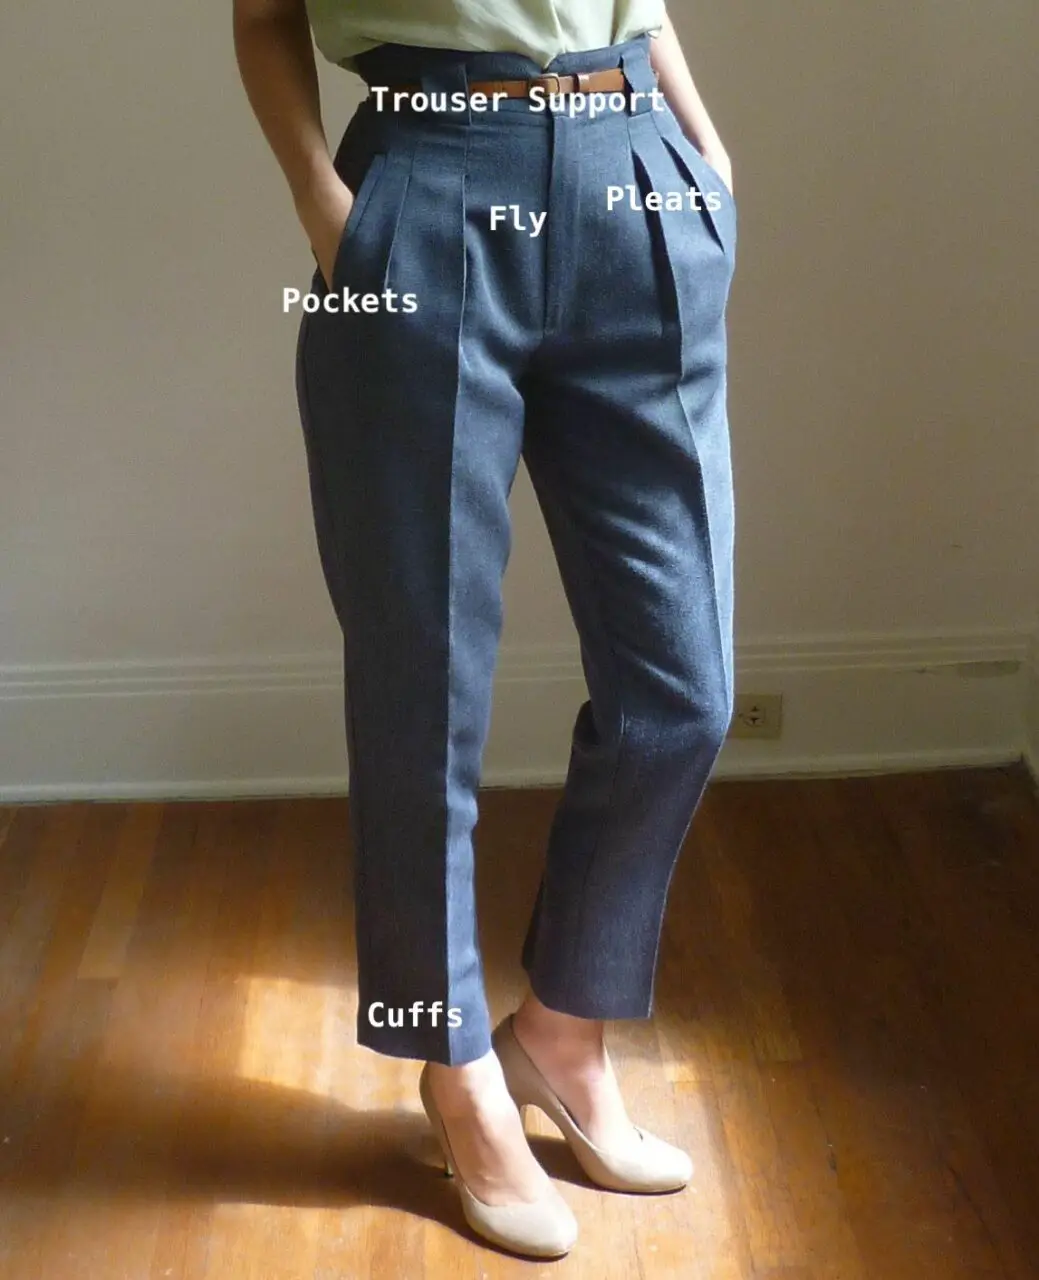 Types of pants - Parts of Pants